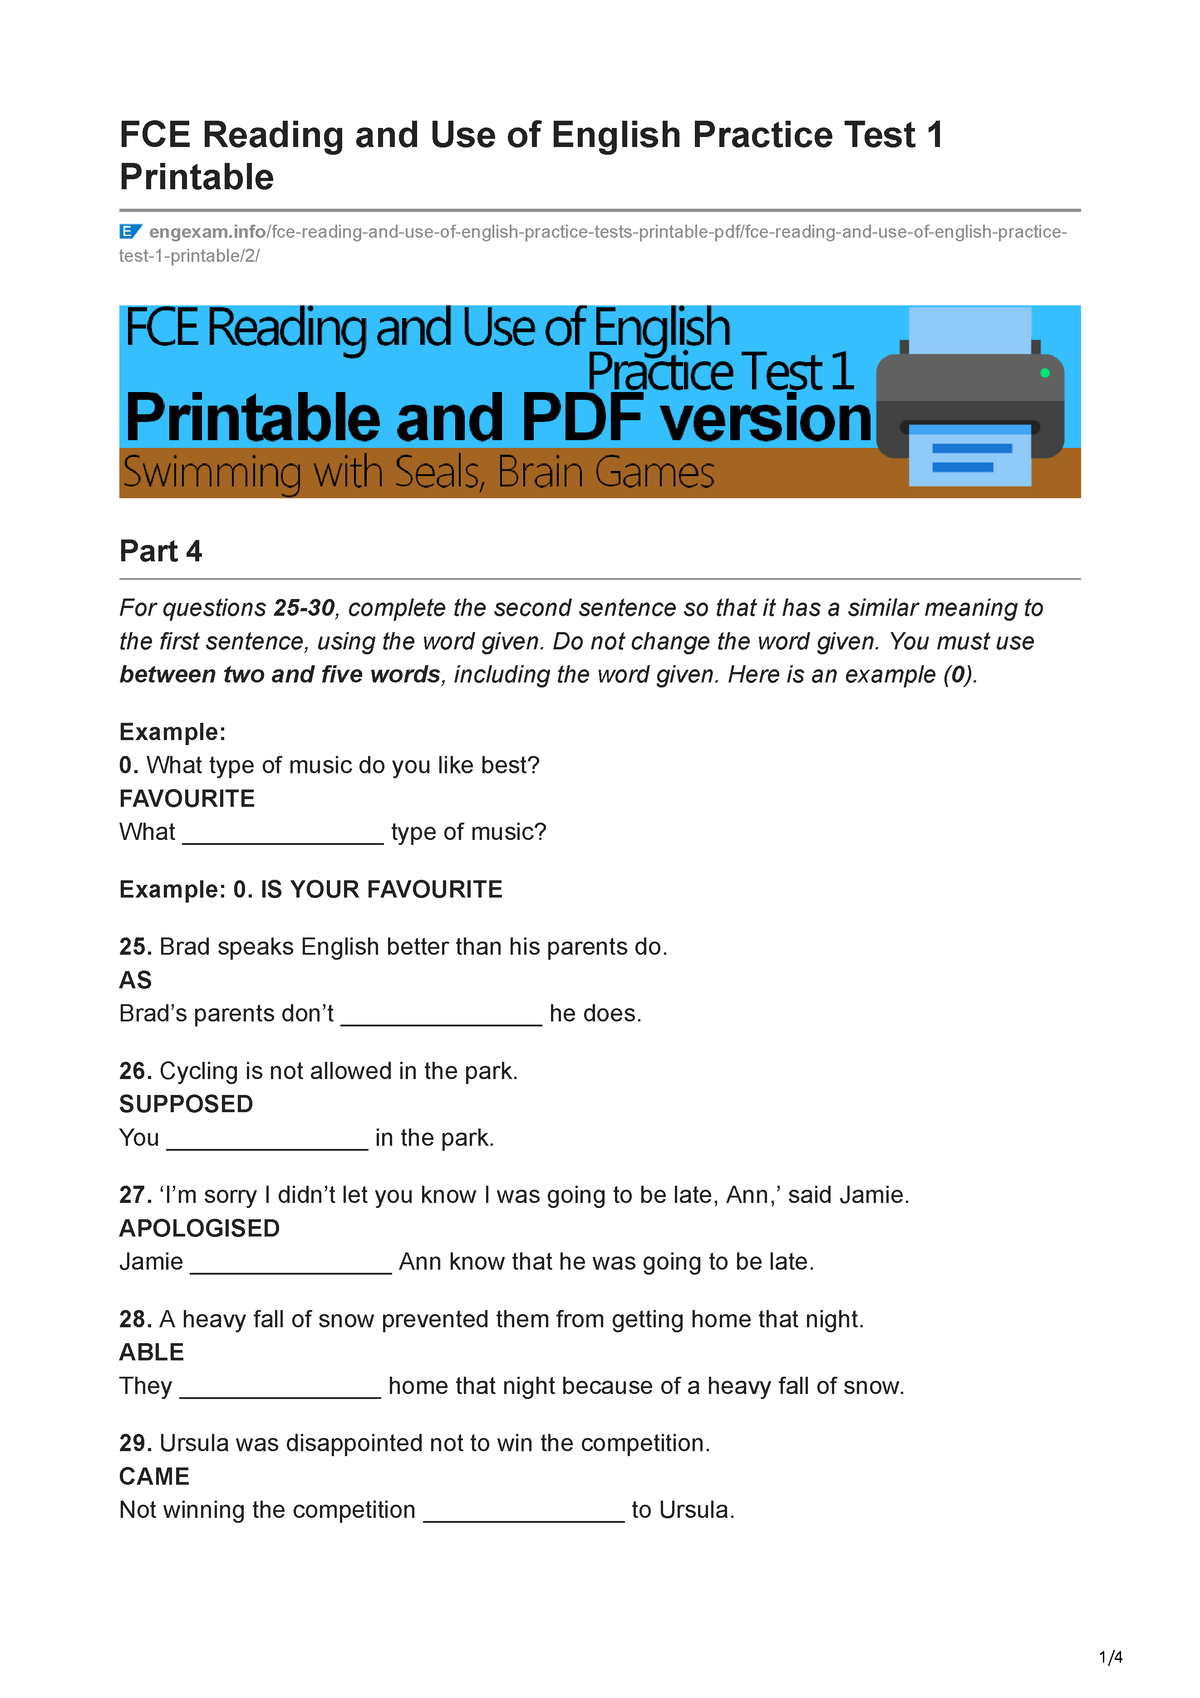 Engexam info FCE Reading And Use Of English Practice Test 1 Printable FCE Reading And Use Of